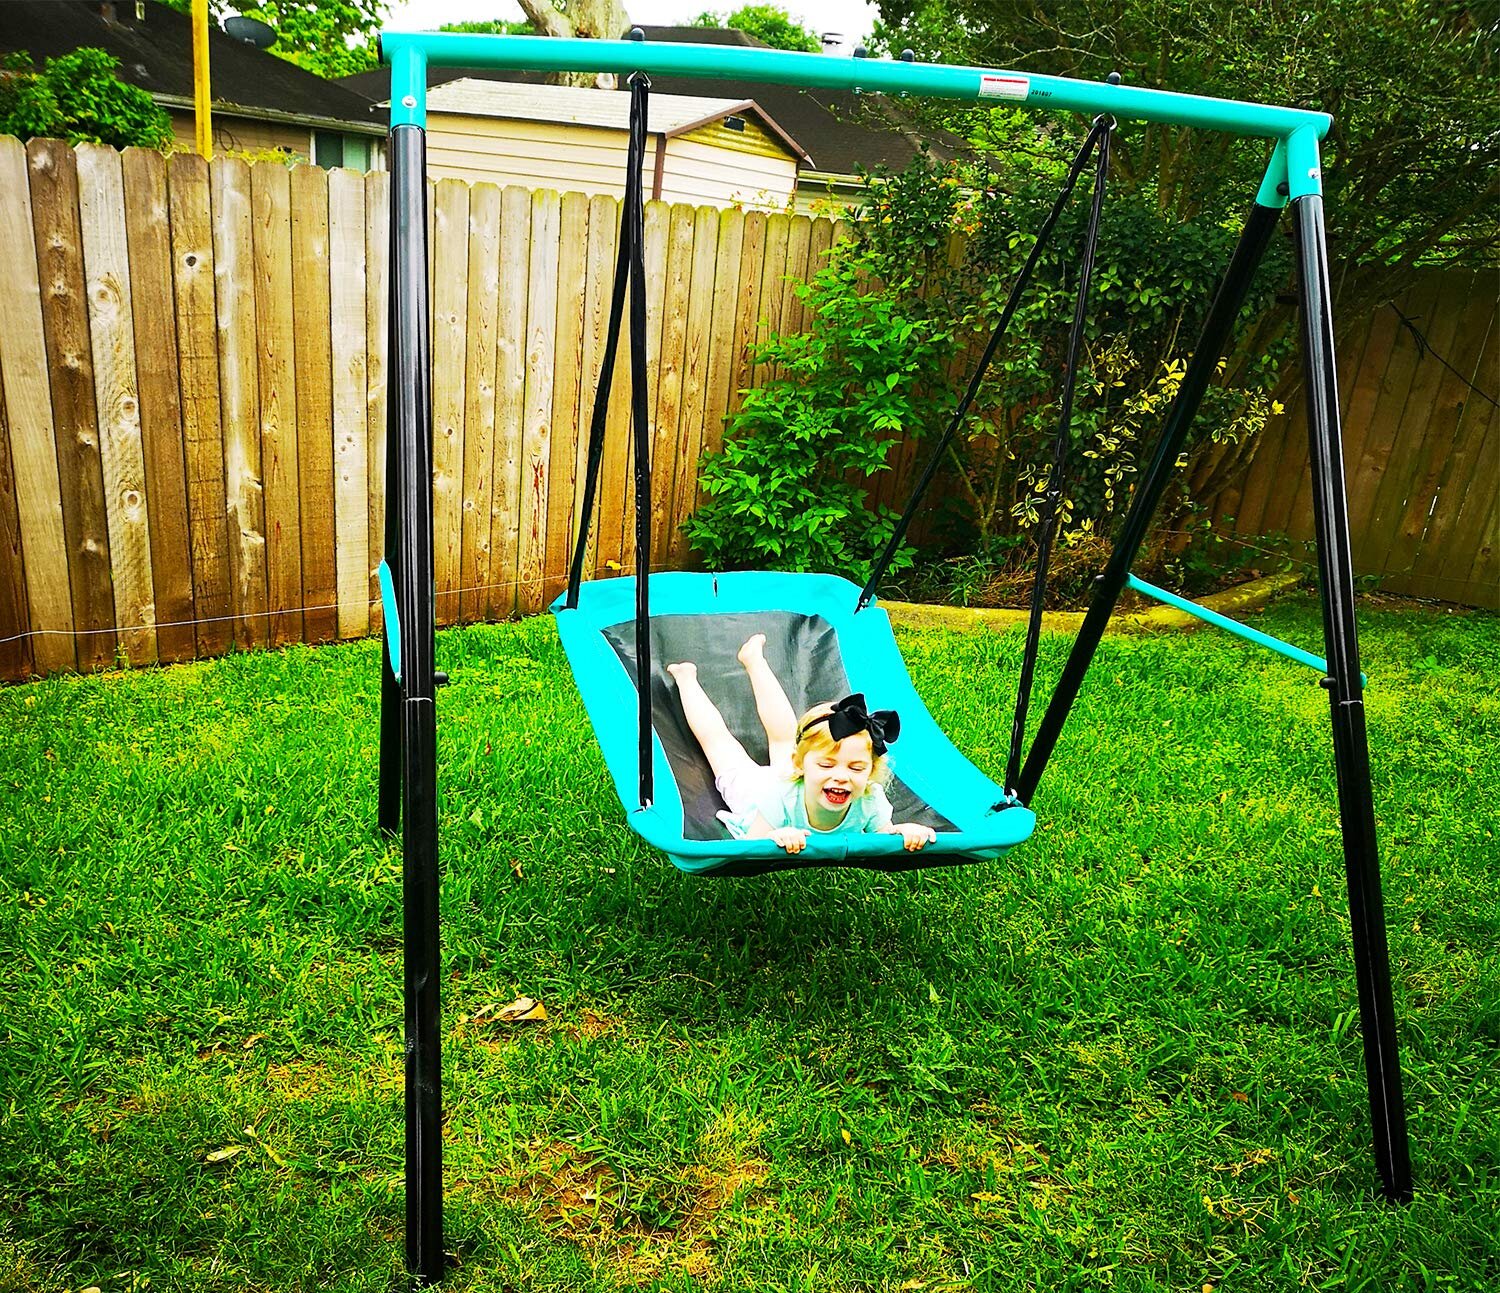 70 Swing Sets for Backyard Swing Set Sturdy Steel Frame for Up to 2 Children Saucer Swing with Frame Toddler Swing with Stand All Weather